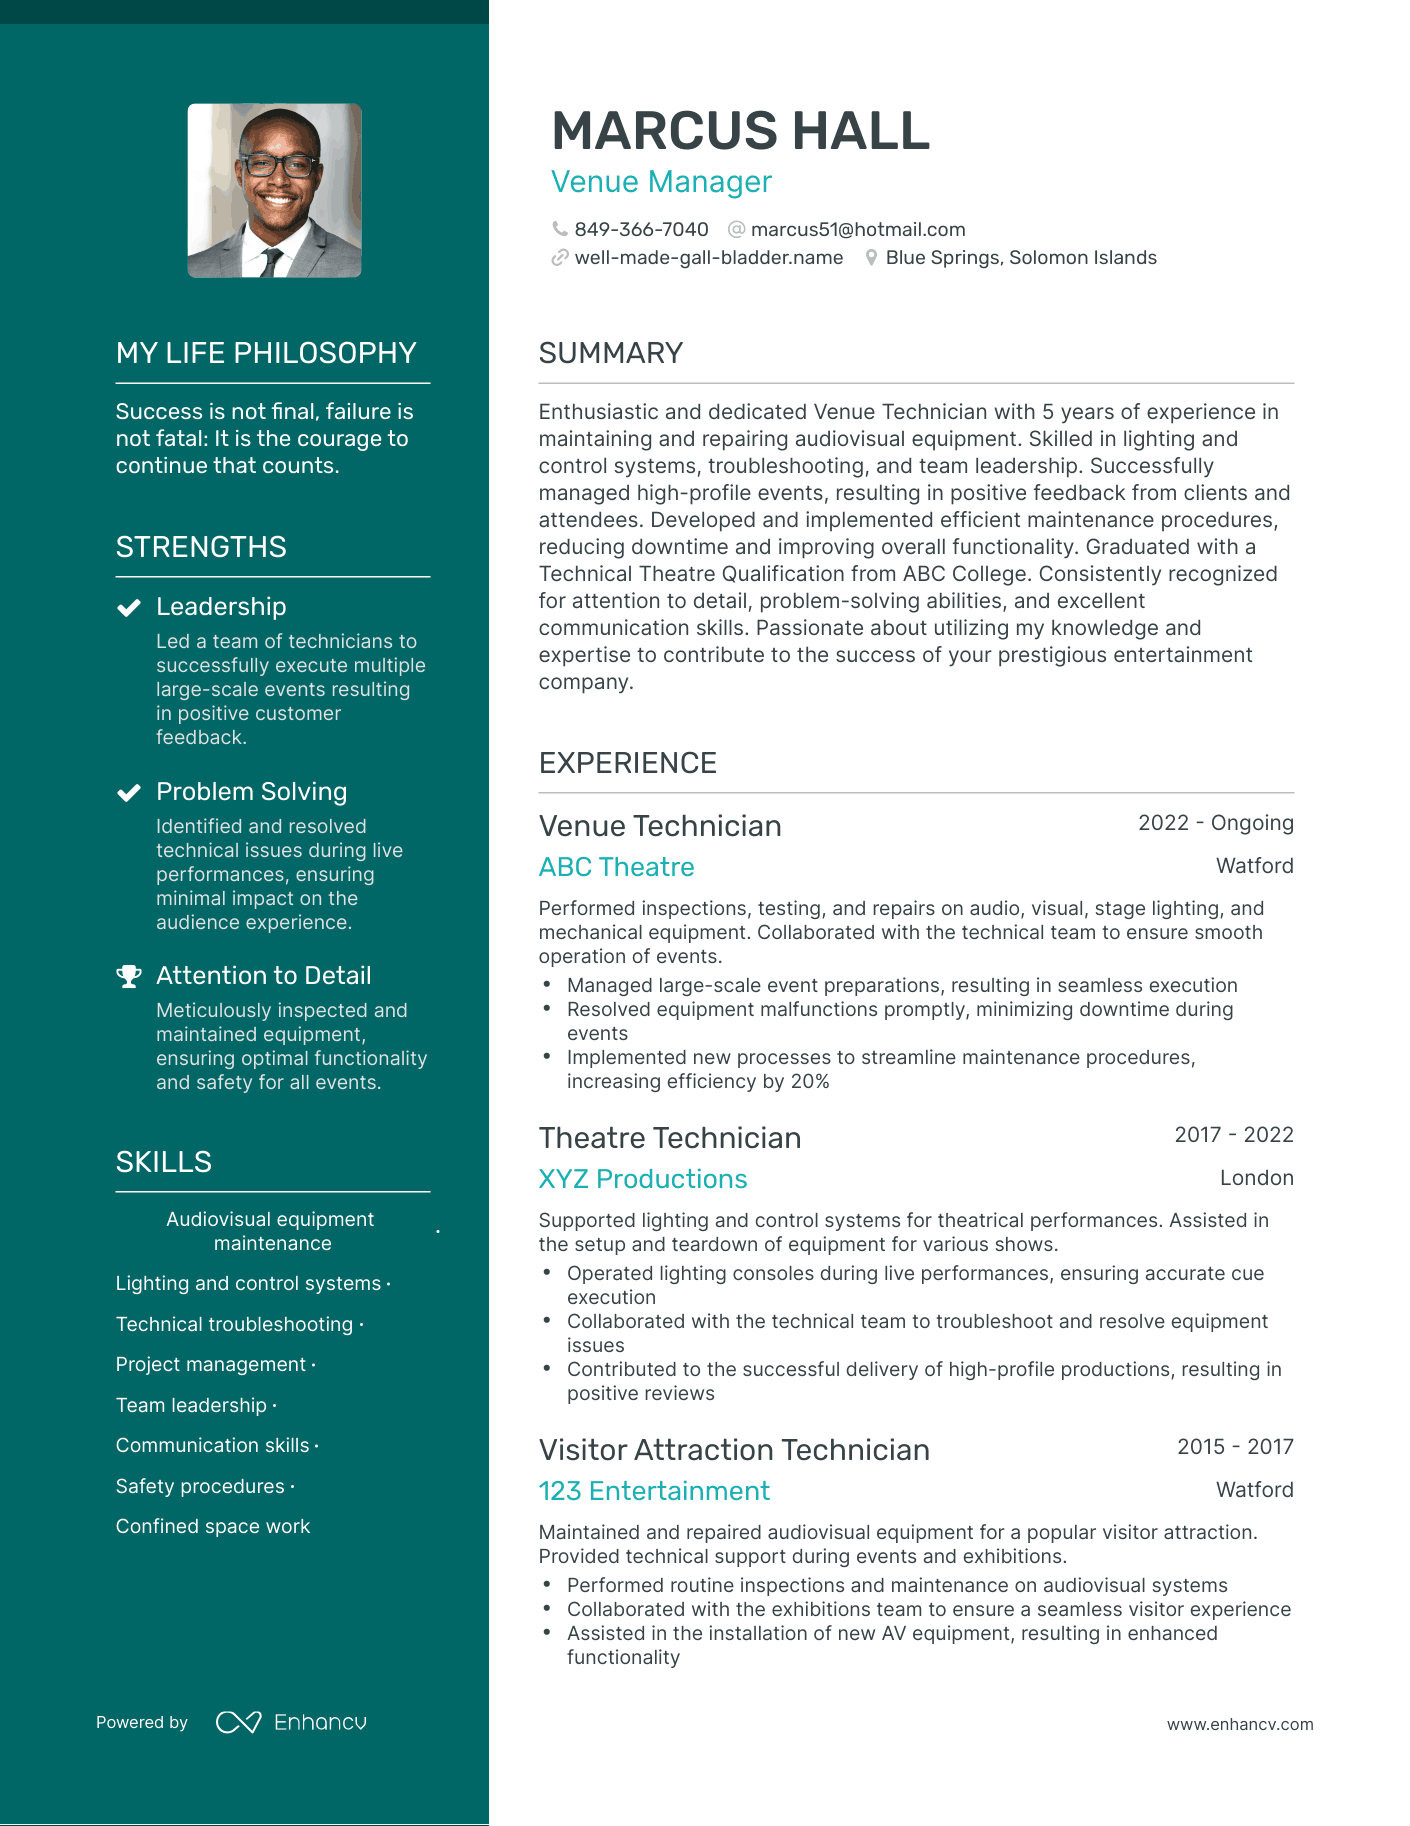 Creative Venue Manager Resume Example